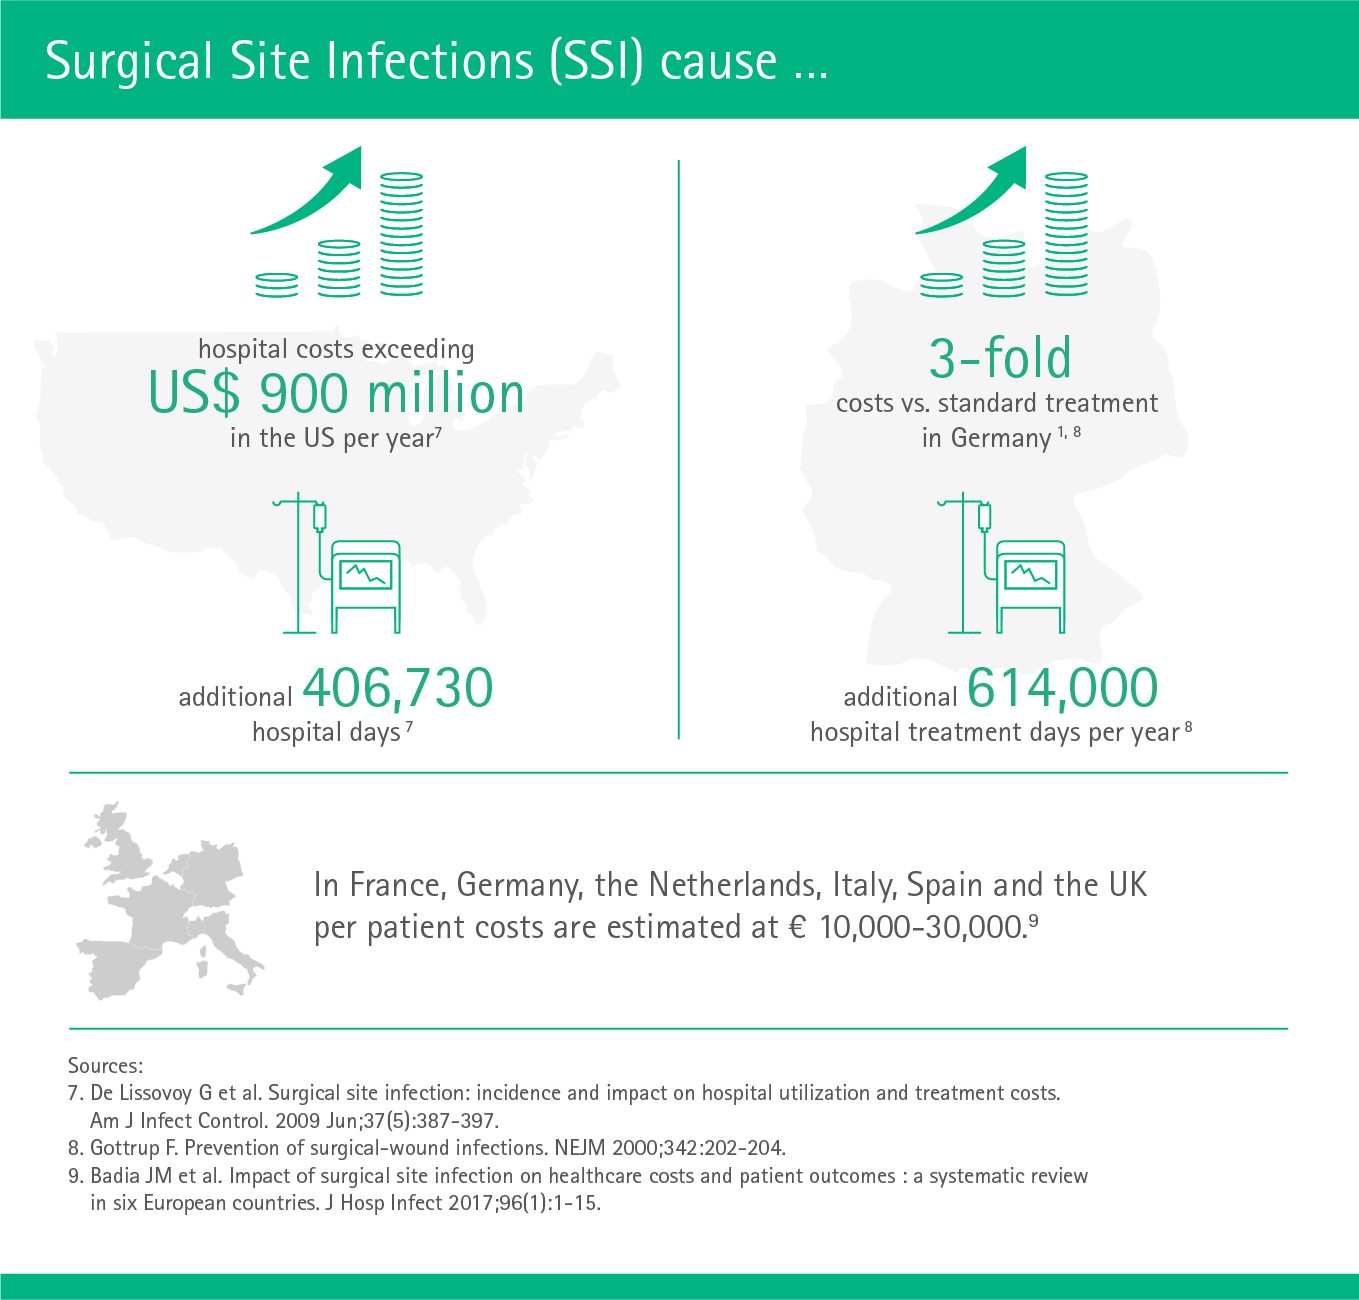 Surgical site infections cause